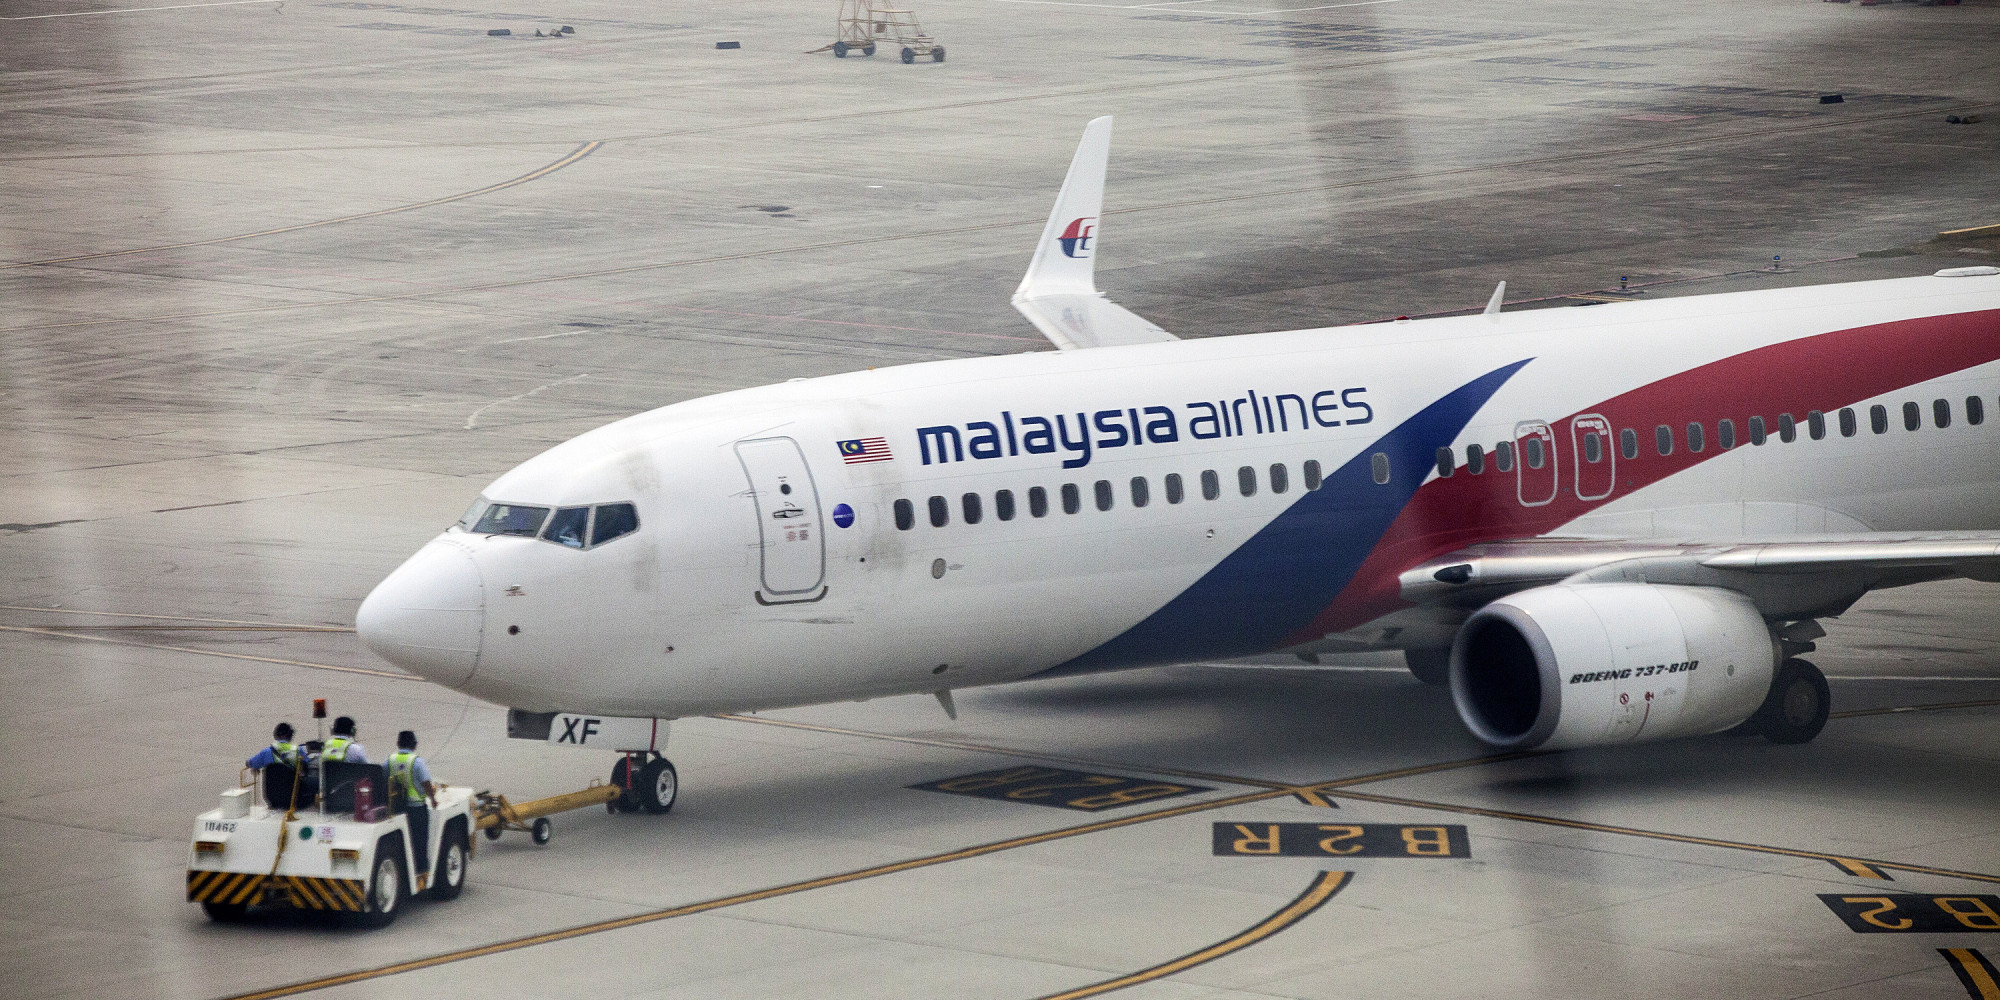 Malaysian Airlines And Views Of Kuala Lumpur Airport As Search Continues Almost One Week Into Disappearance Of Flight 370